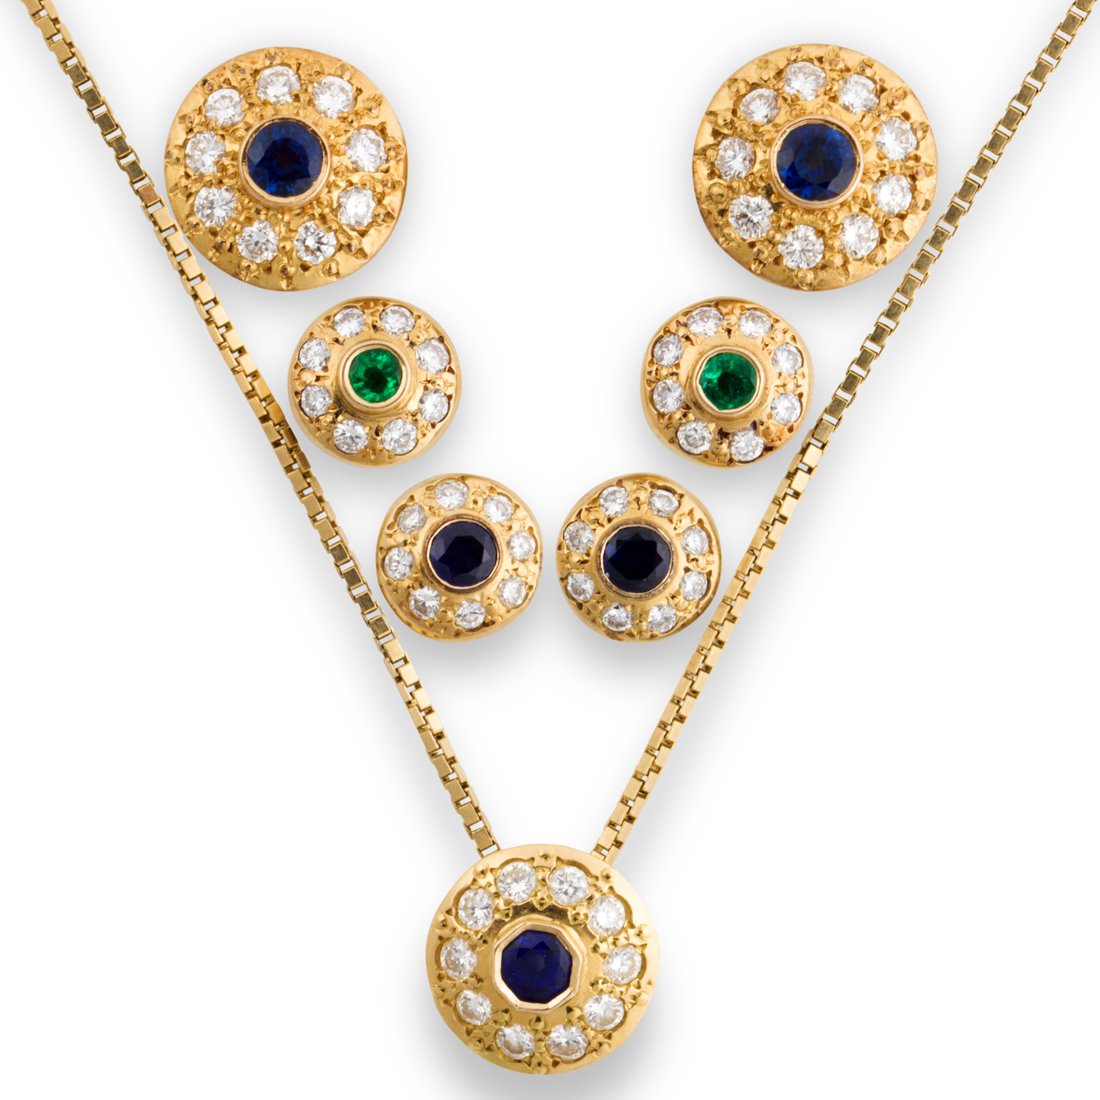 A GROUP OF GEMSTONE AND GOLD JEWELRY 3a2722